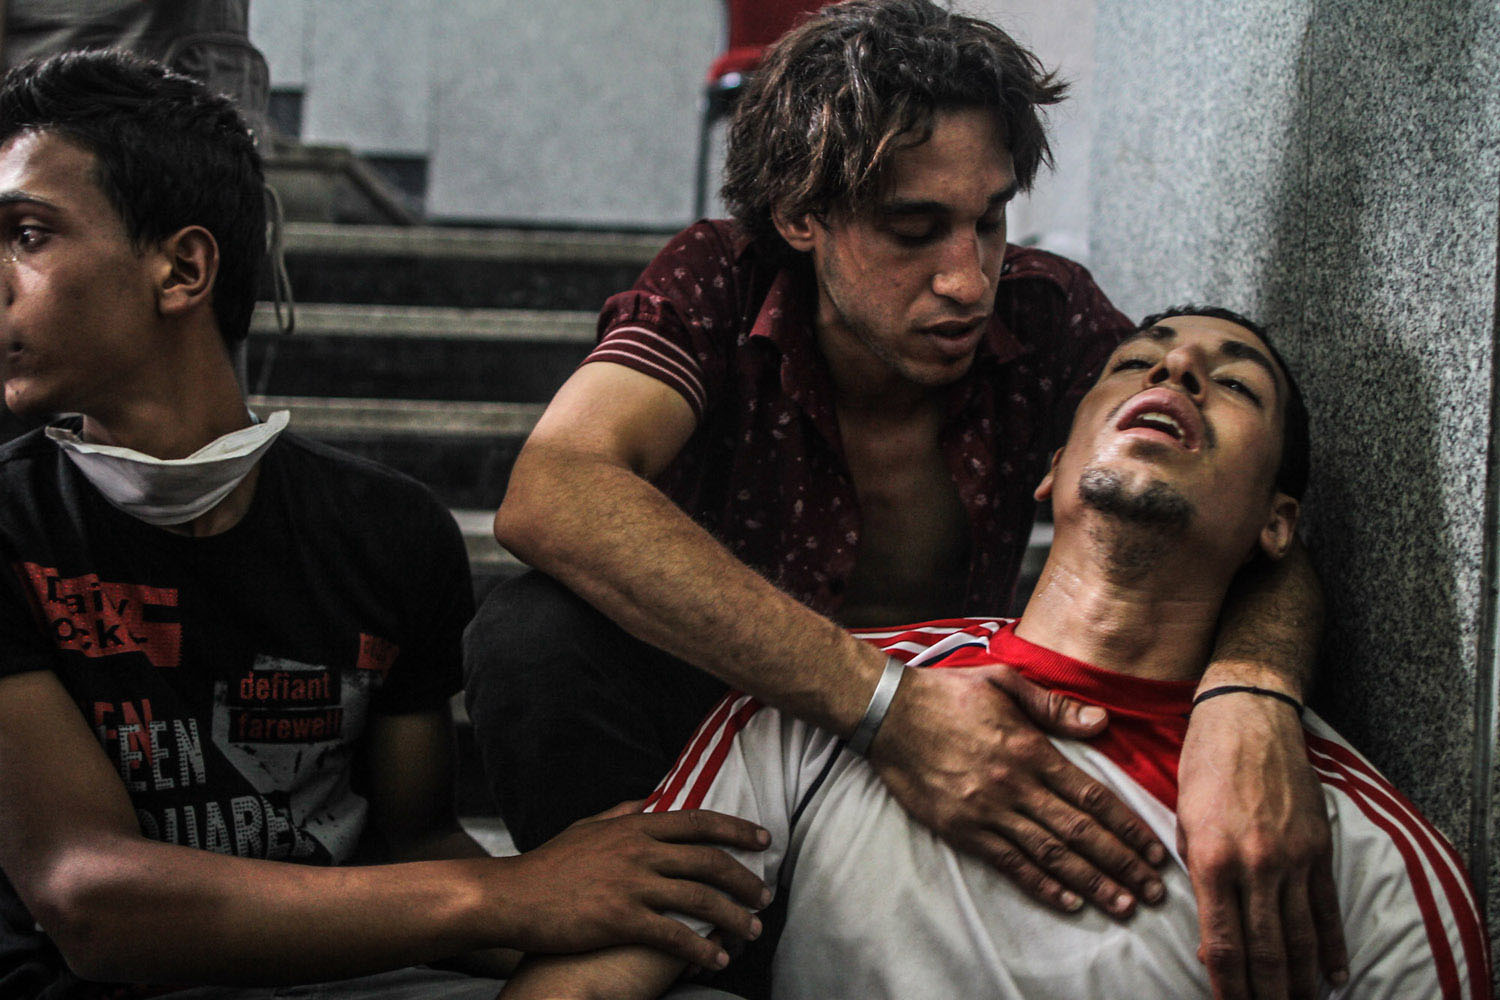 July 27, 2013. A brother of one of the victims is comforted by friends outside the room being used as a makeshift morgue. He kept repeating: “We came together. We have to go home together.”